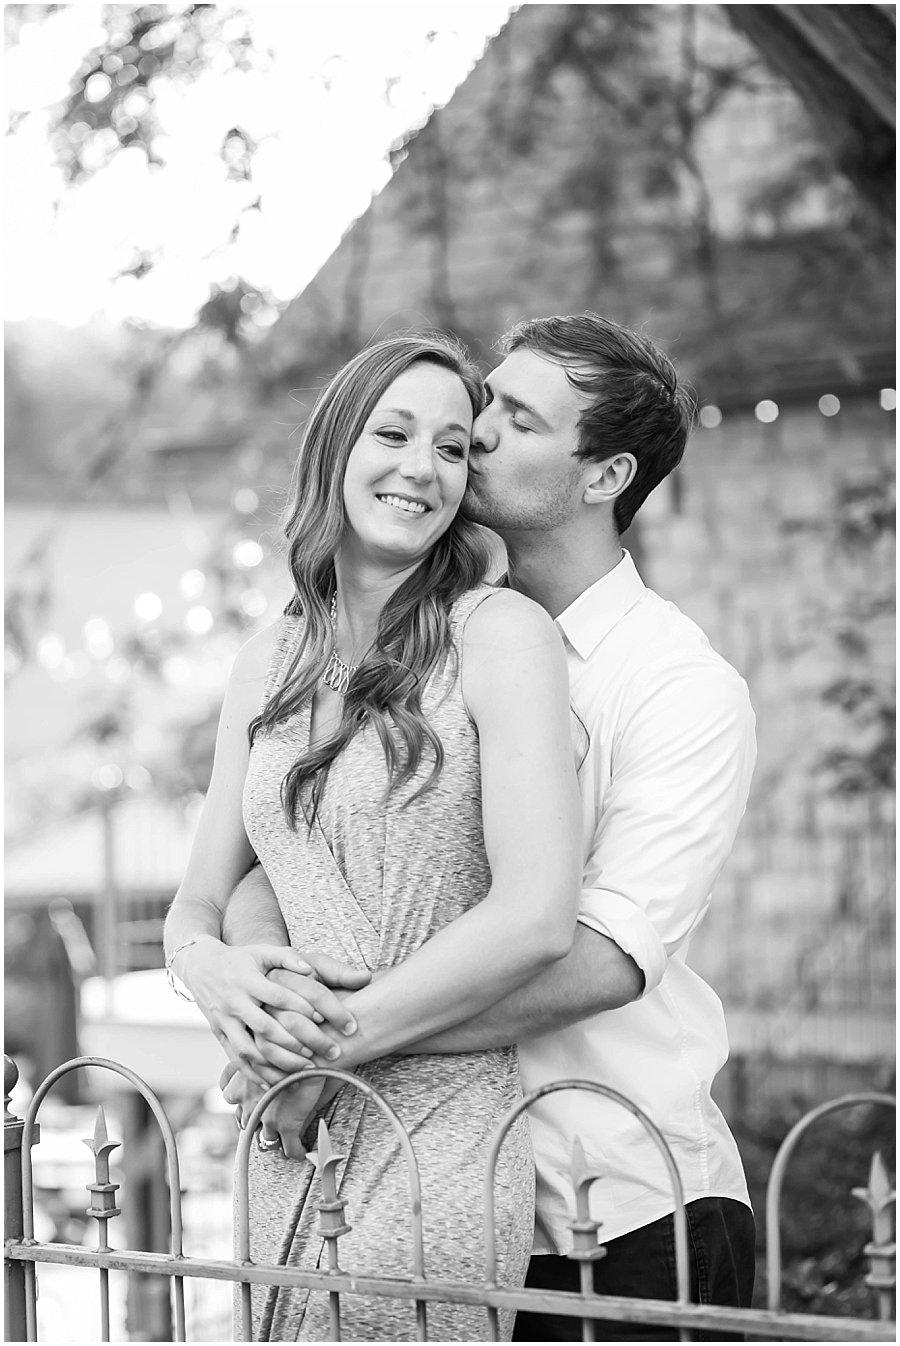 Breitenbach Winery Engagement Session